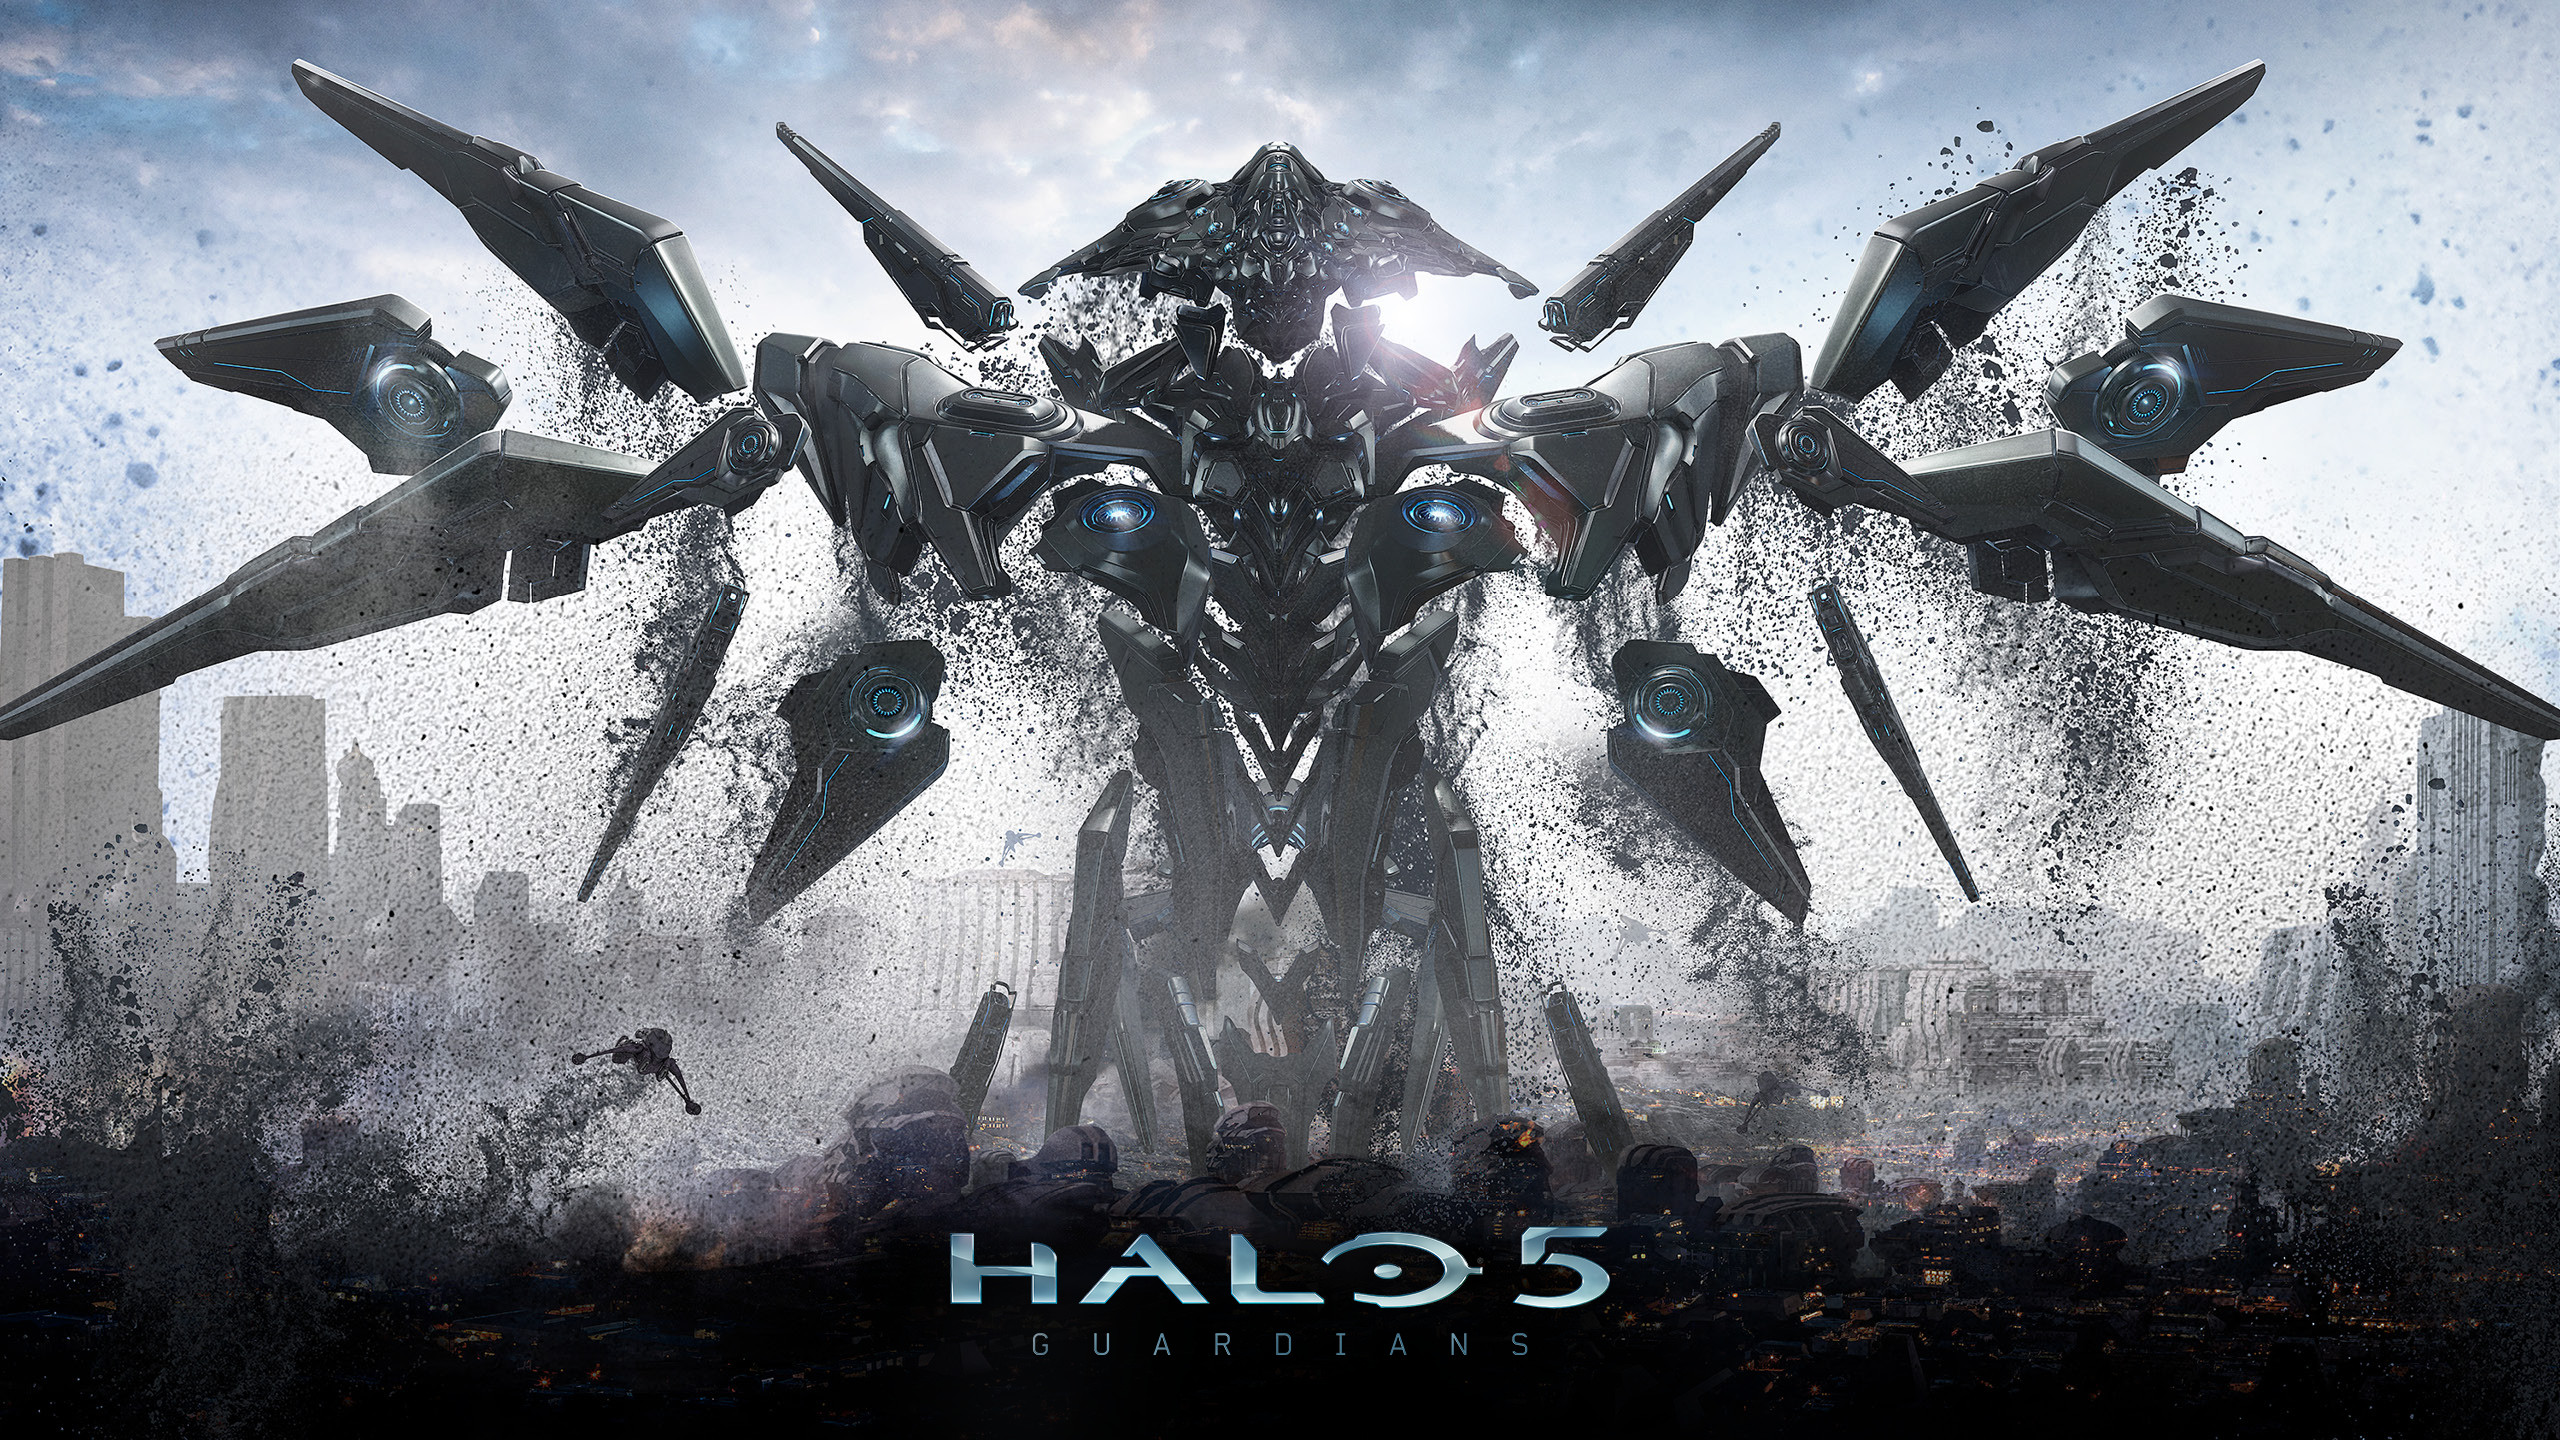 Guardian Halo 5 Guardians Wallpapers HD Wallpapers 2560x1440